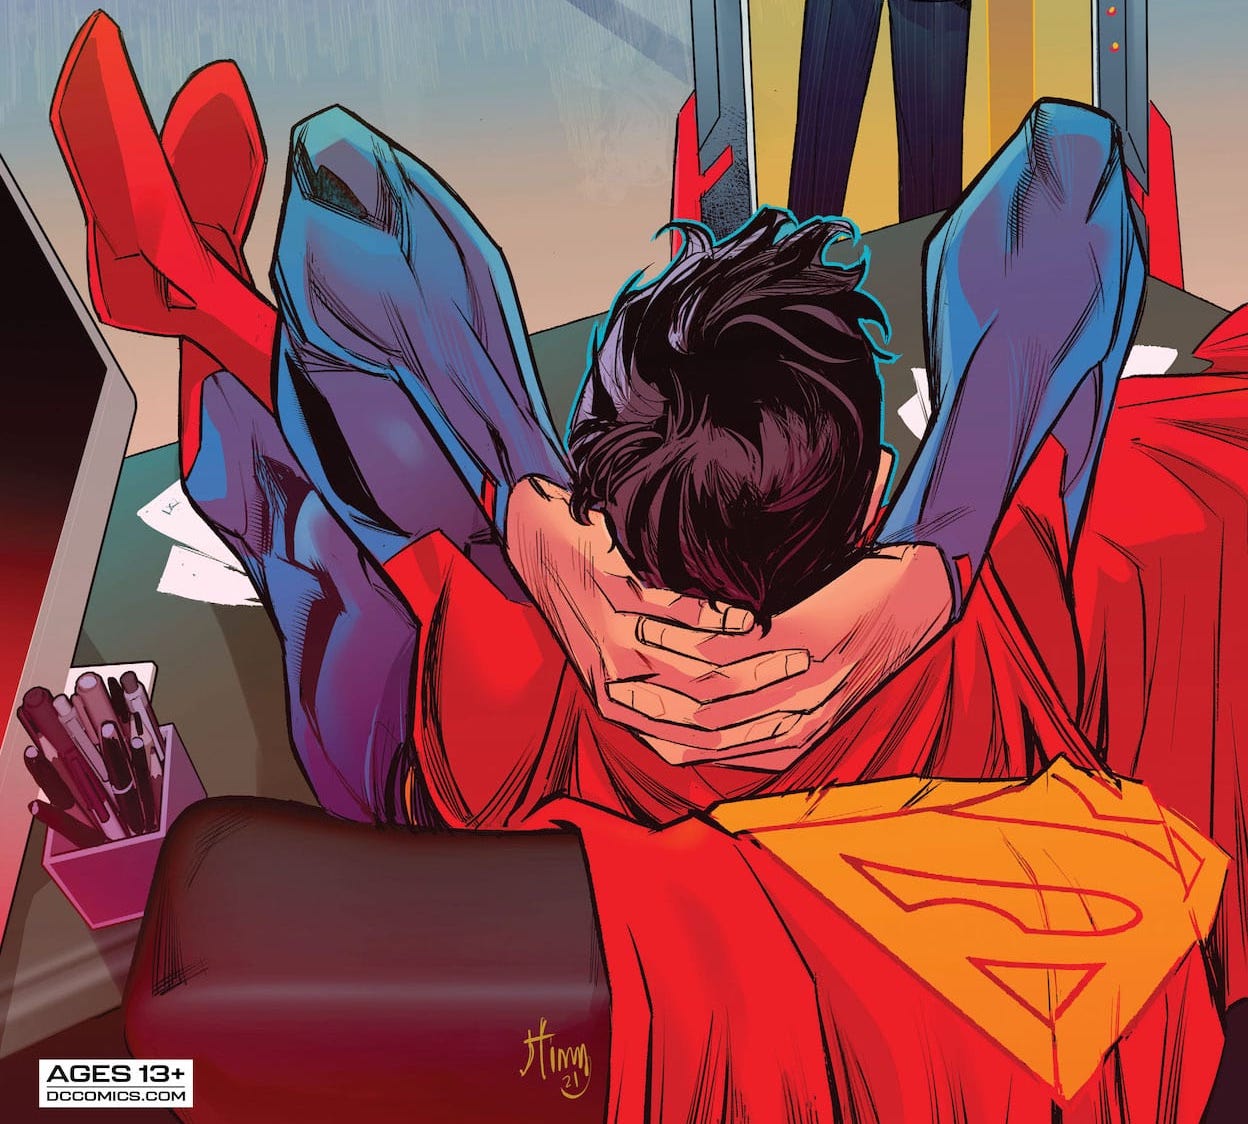 'Superman: Son of Kal-El 2021 Annual' #1 is a great return for Lex Luthor